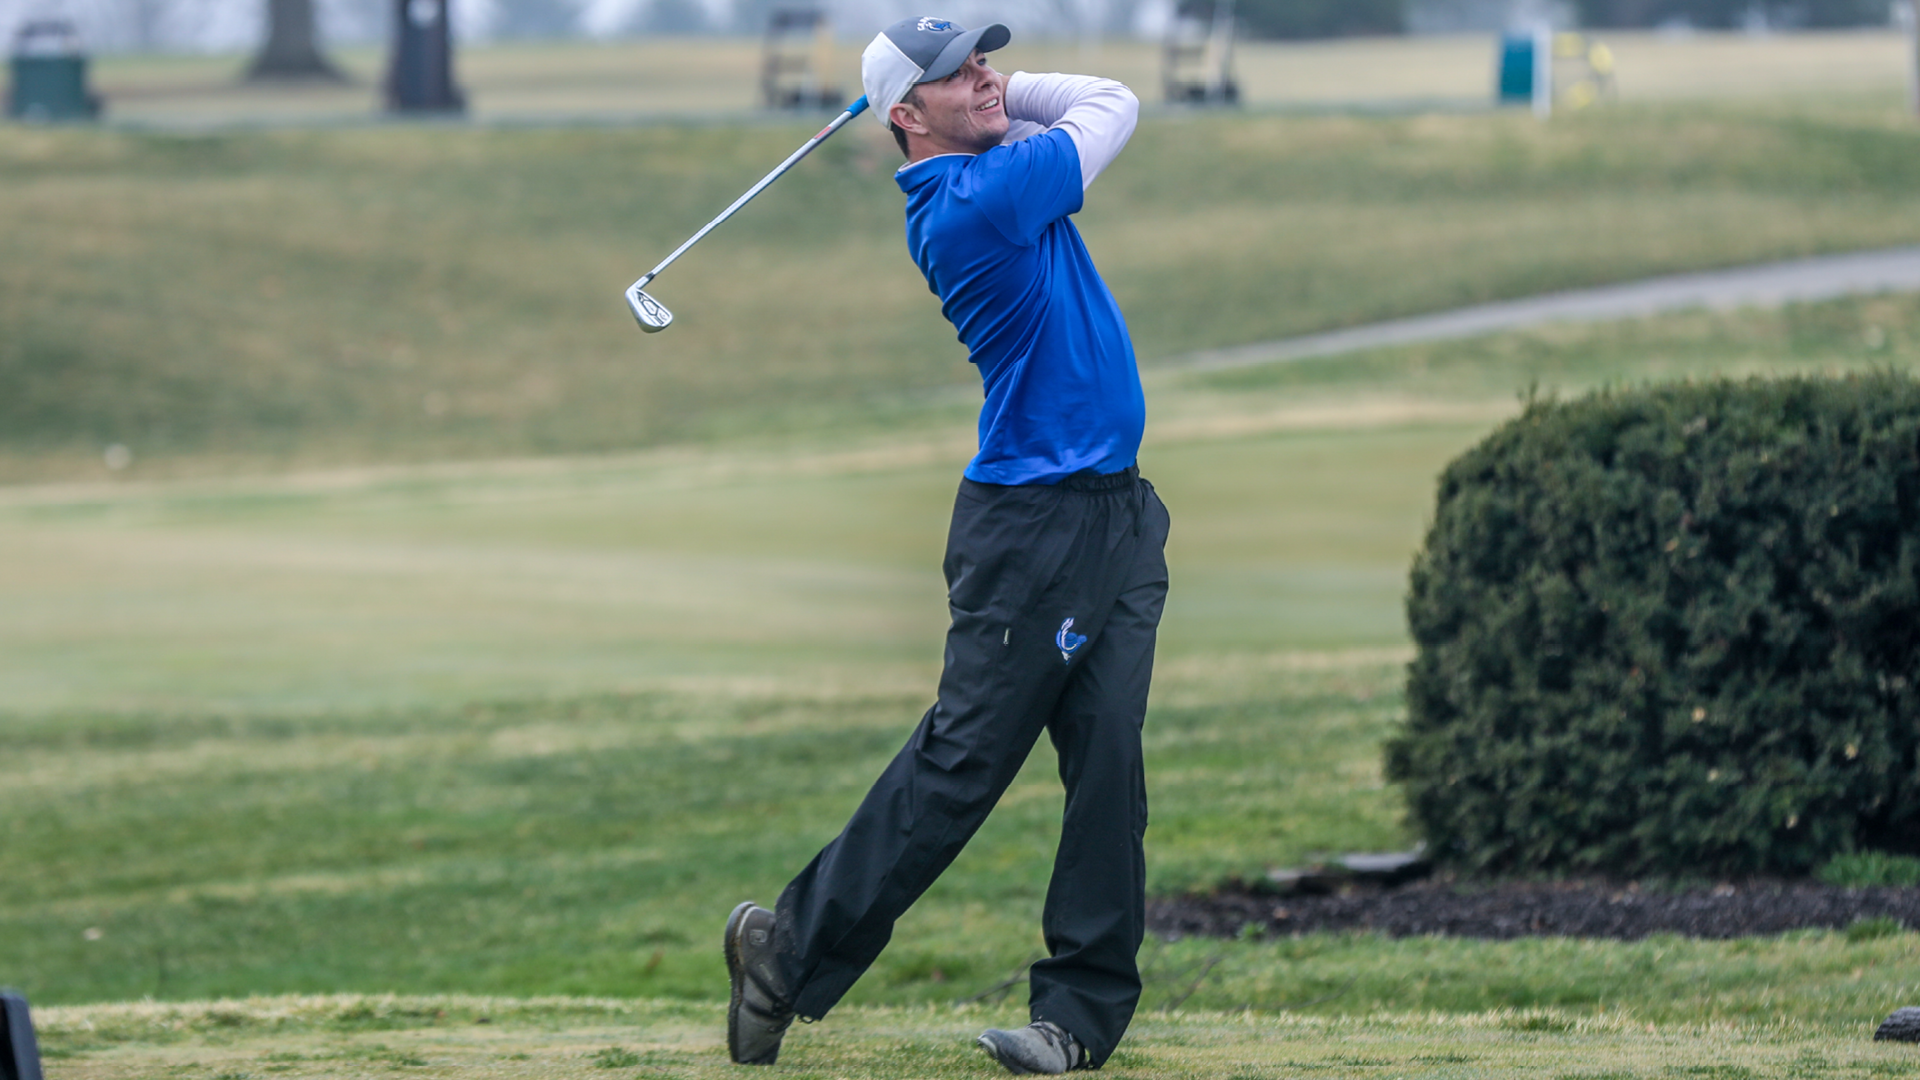 Dan Murphy, five-time Men's Golfer of the Week, in action. Photo from Cabrini Athletics.